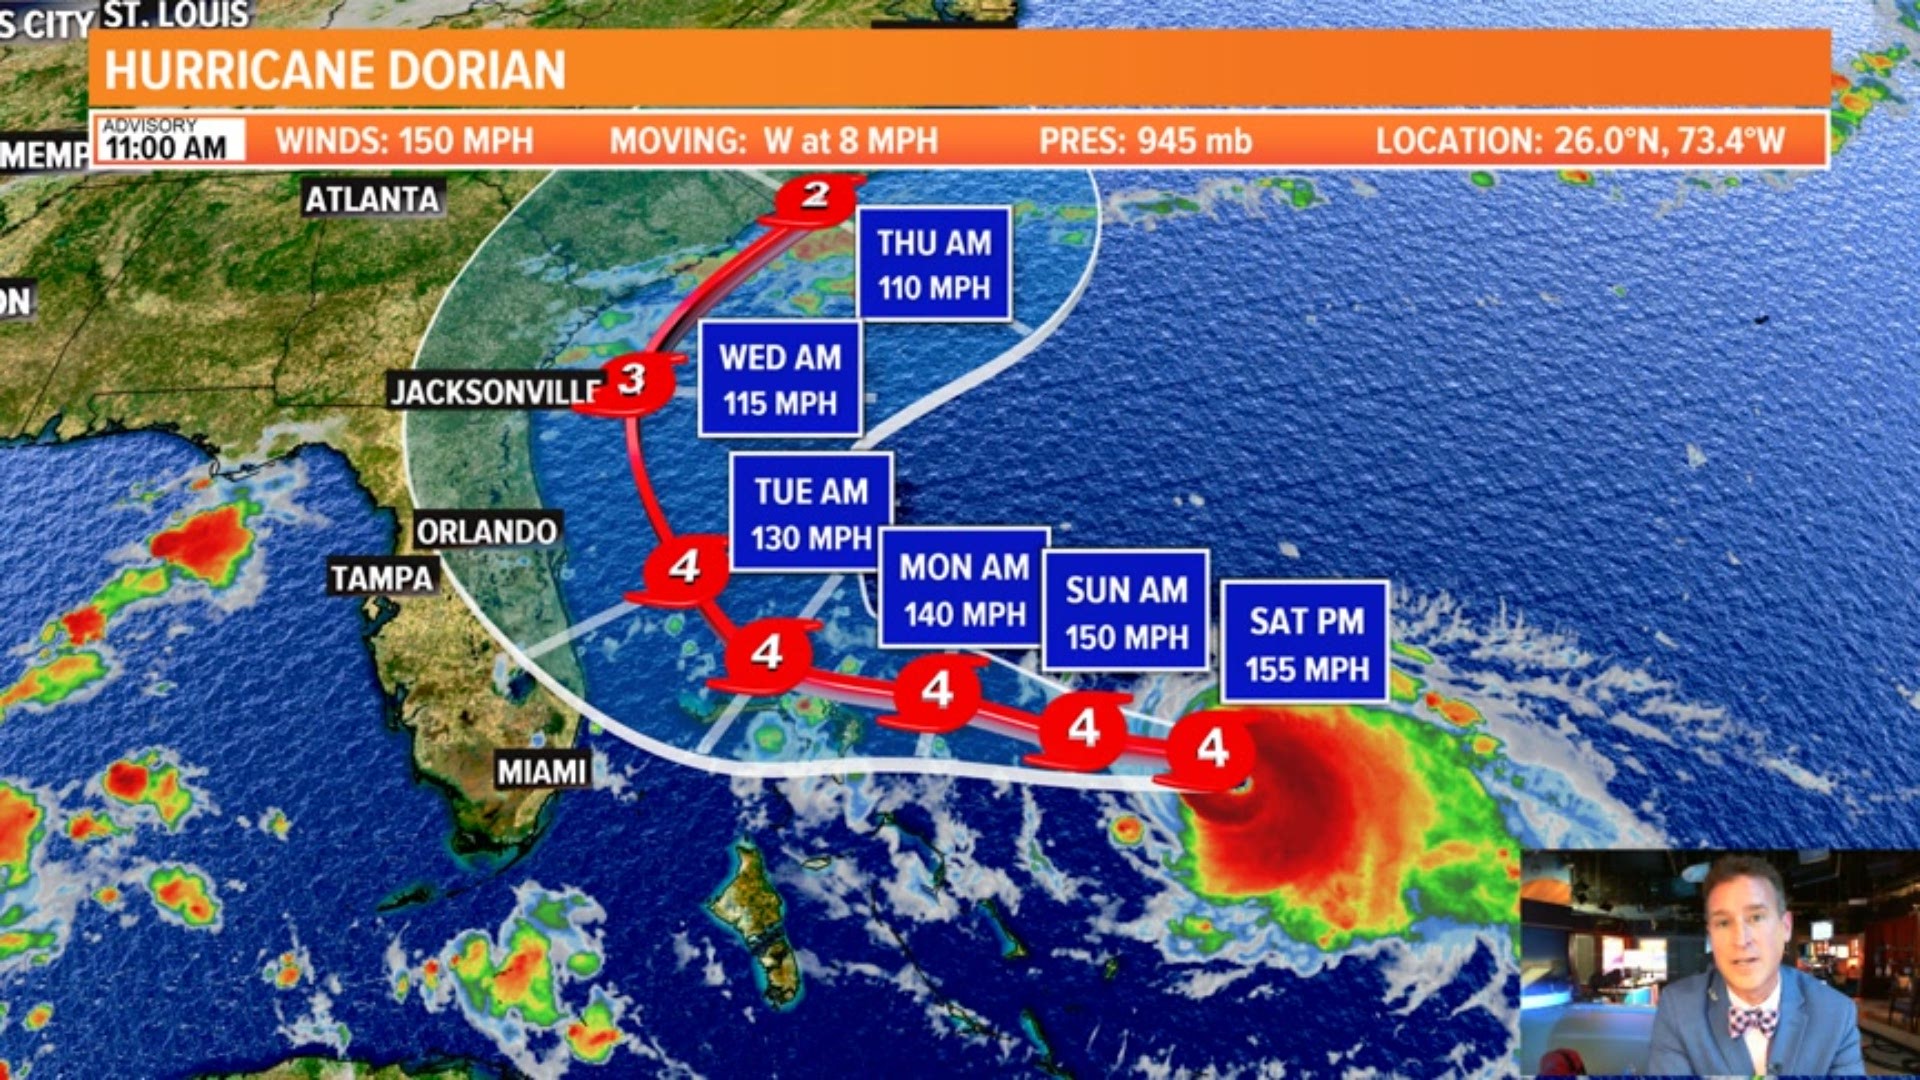 Dorian has slowed down even more with an expected re-curve even farther east of Florida. But no all clear can be given yet. Stay prepared and keep checking back.